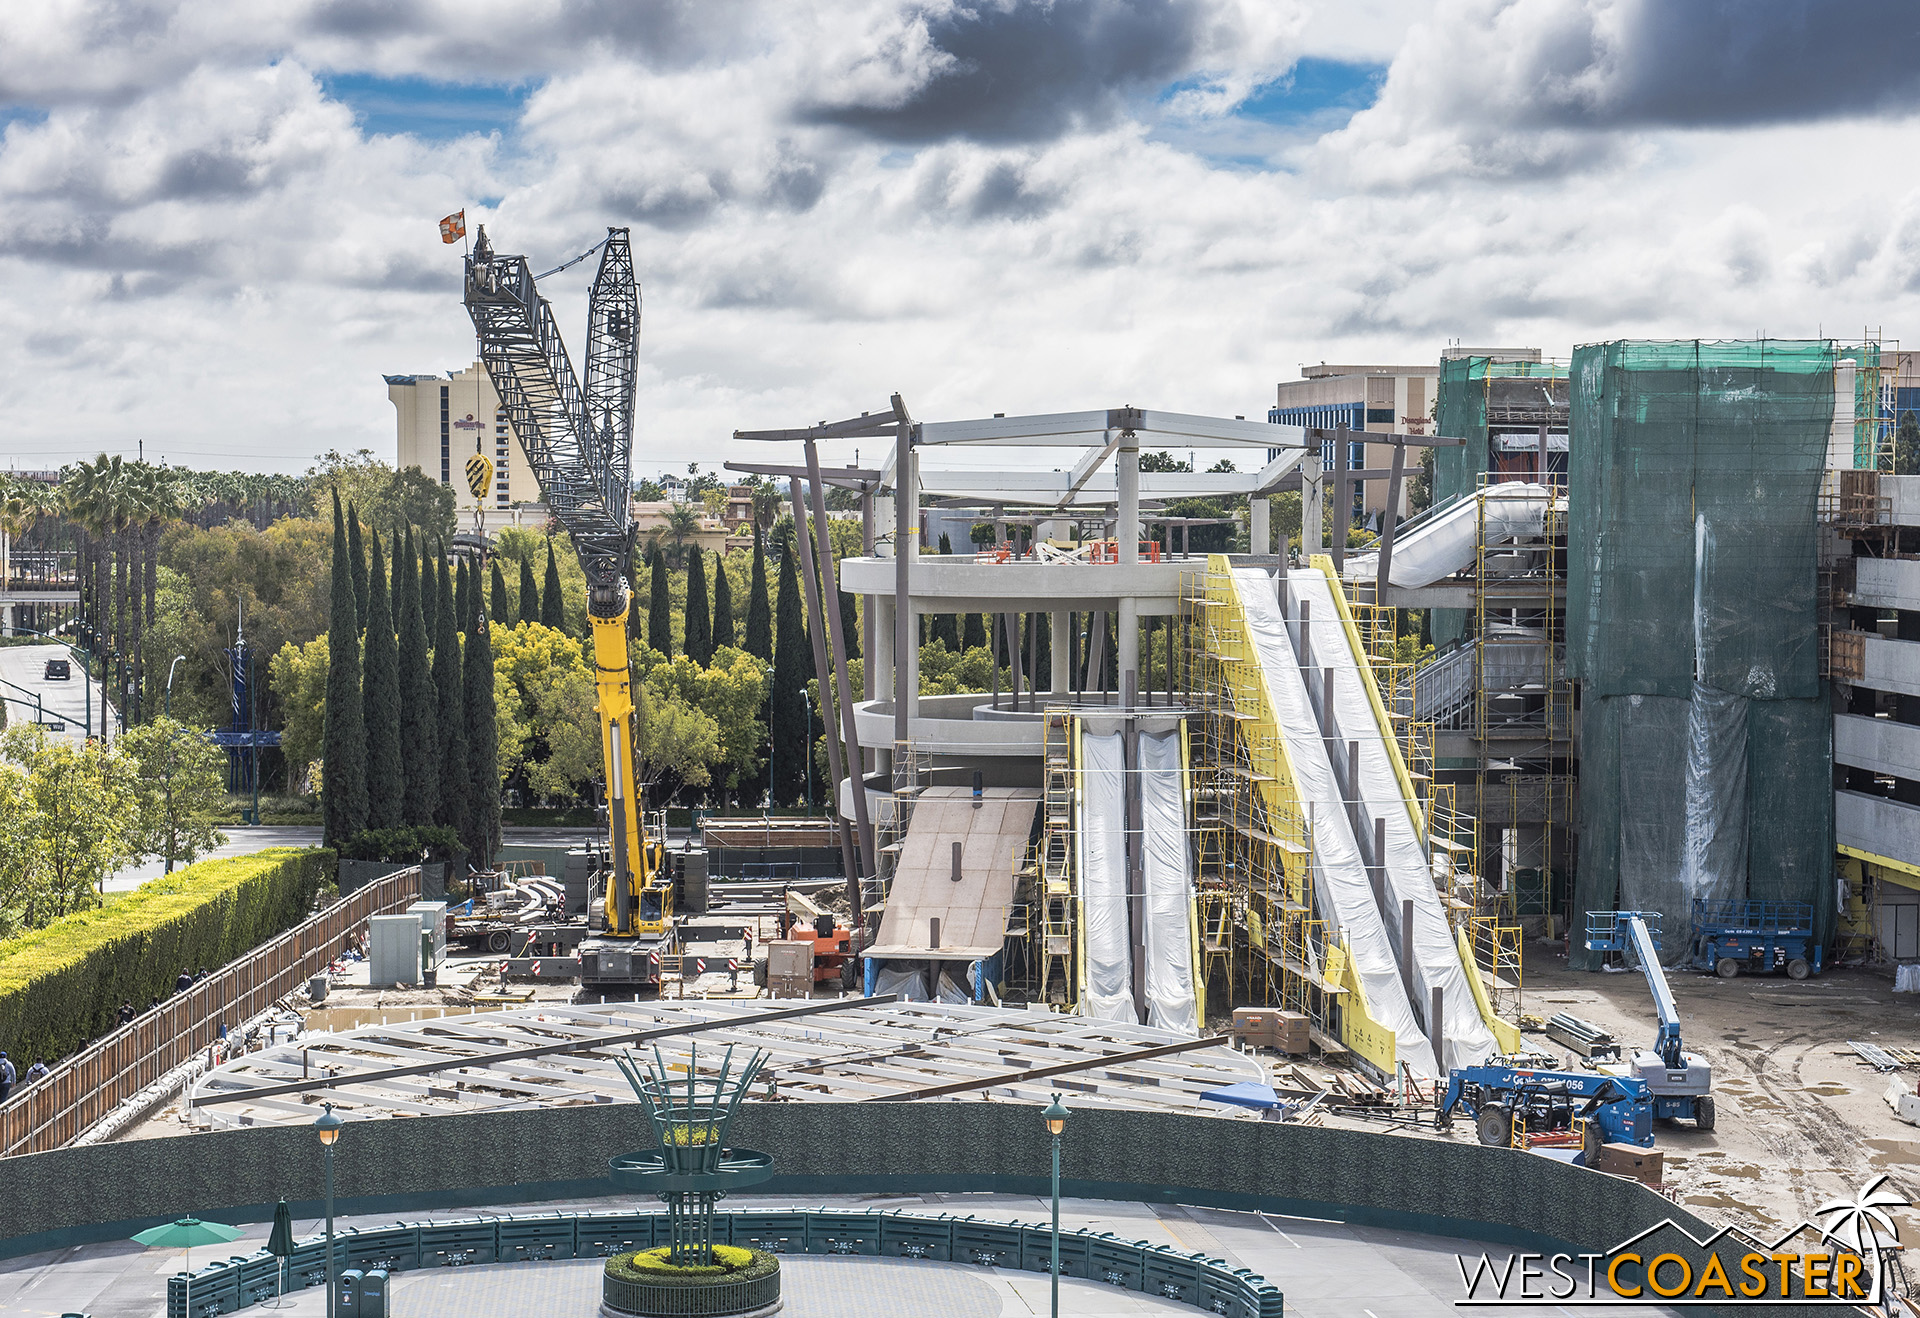  The giant, circular canopy still remains on the ground, but they’ve thrown up some steel beams and columns up the sides and top of the escalator promenade to support it. 